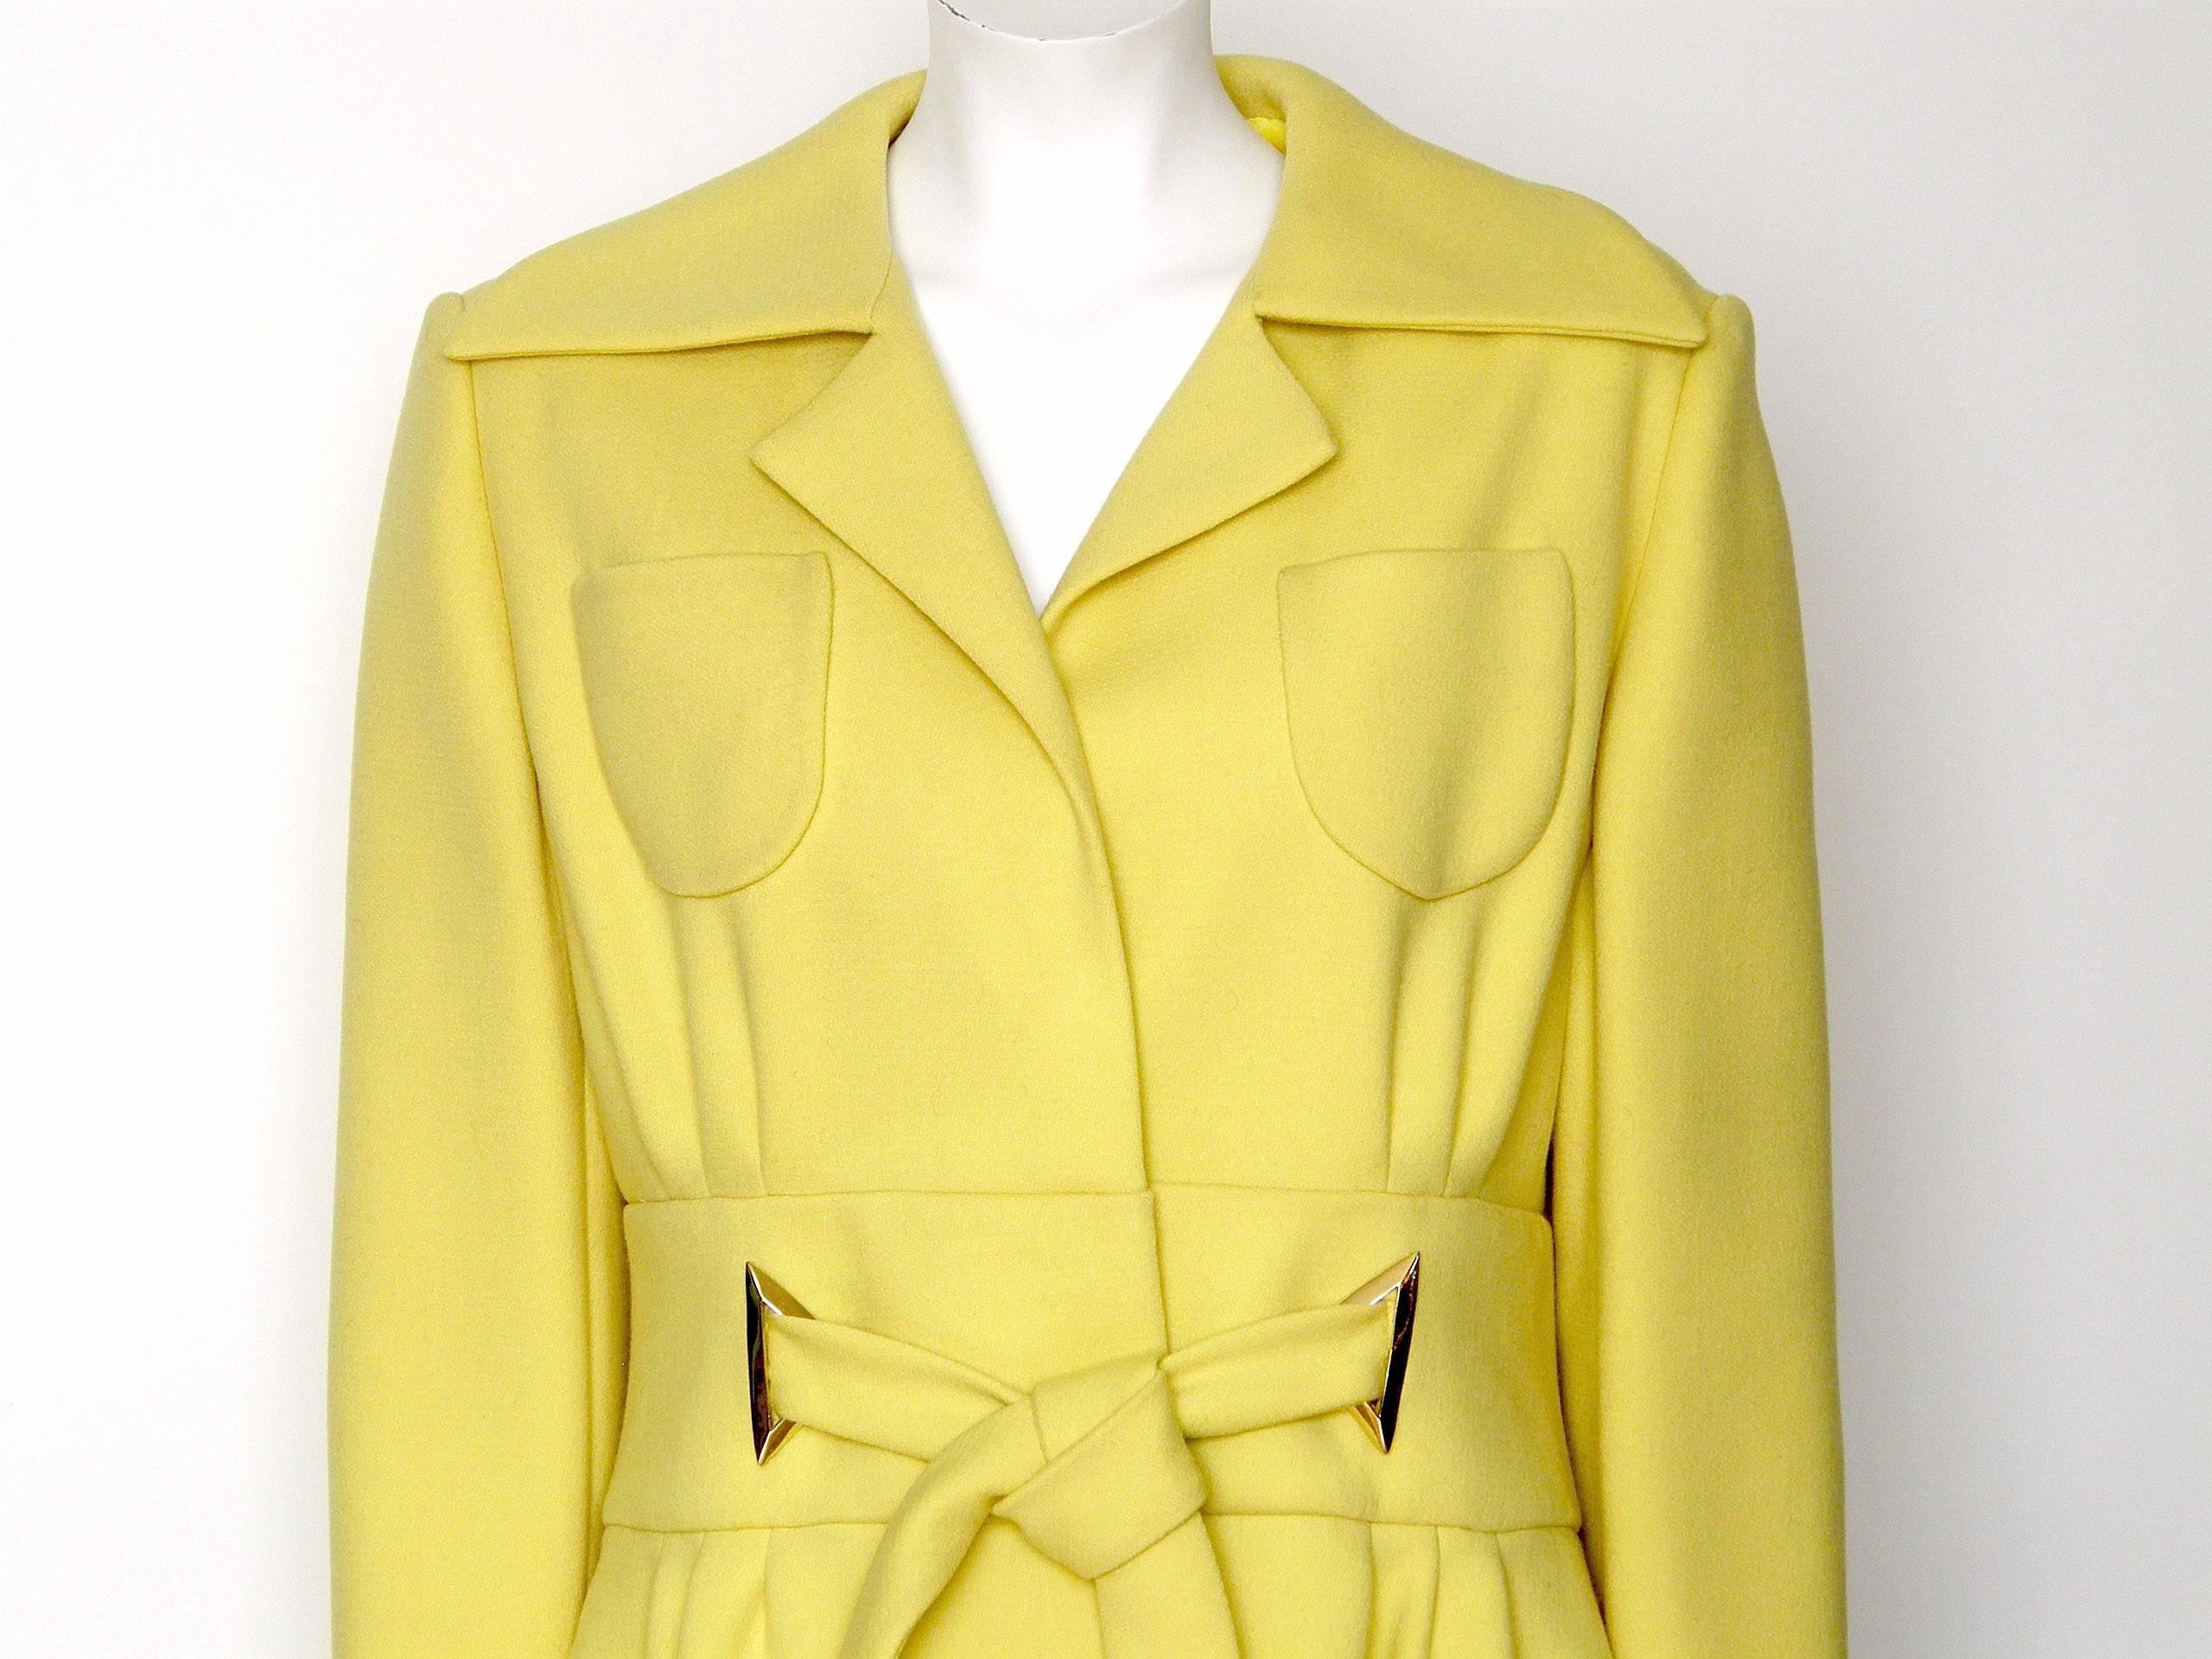 This sunny yellow coat will brighten up your winter days. It has a wide, splayed collar, 2 open top breast pockets, a wide waistband, and ties at the waist. There are stylish, gold-plated triangular accents where the ties attach to the waistband,